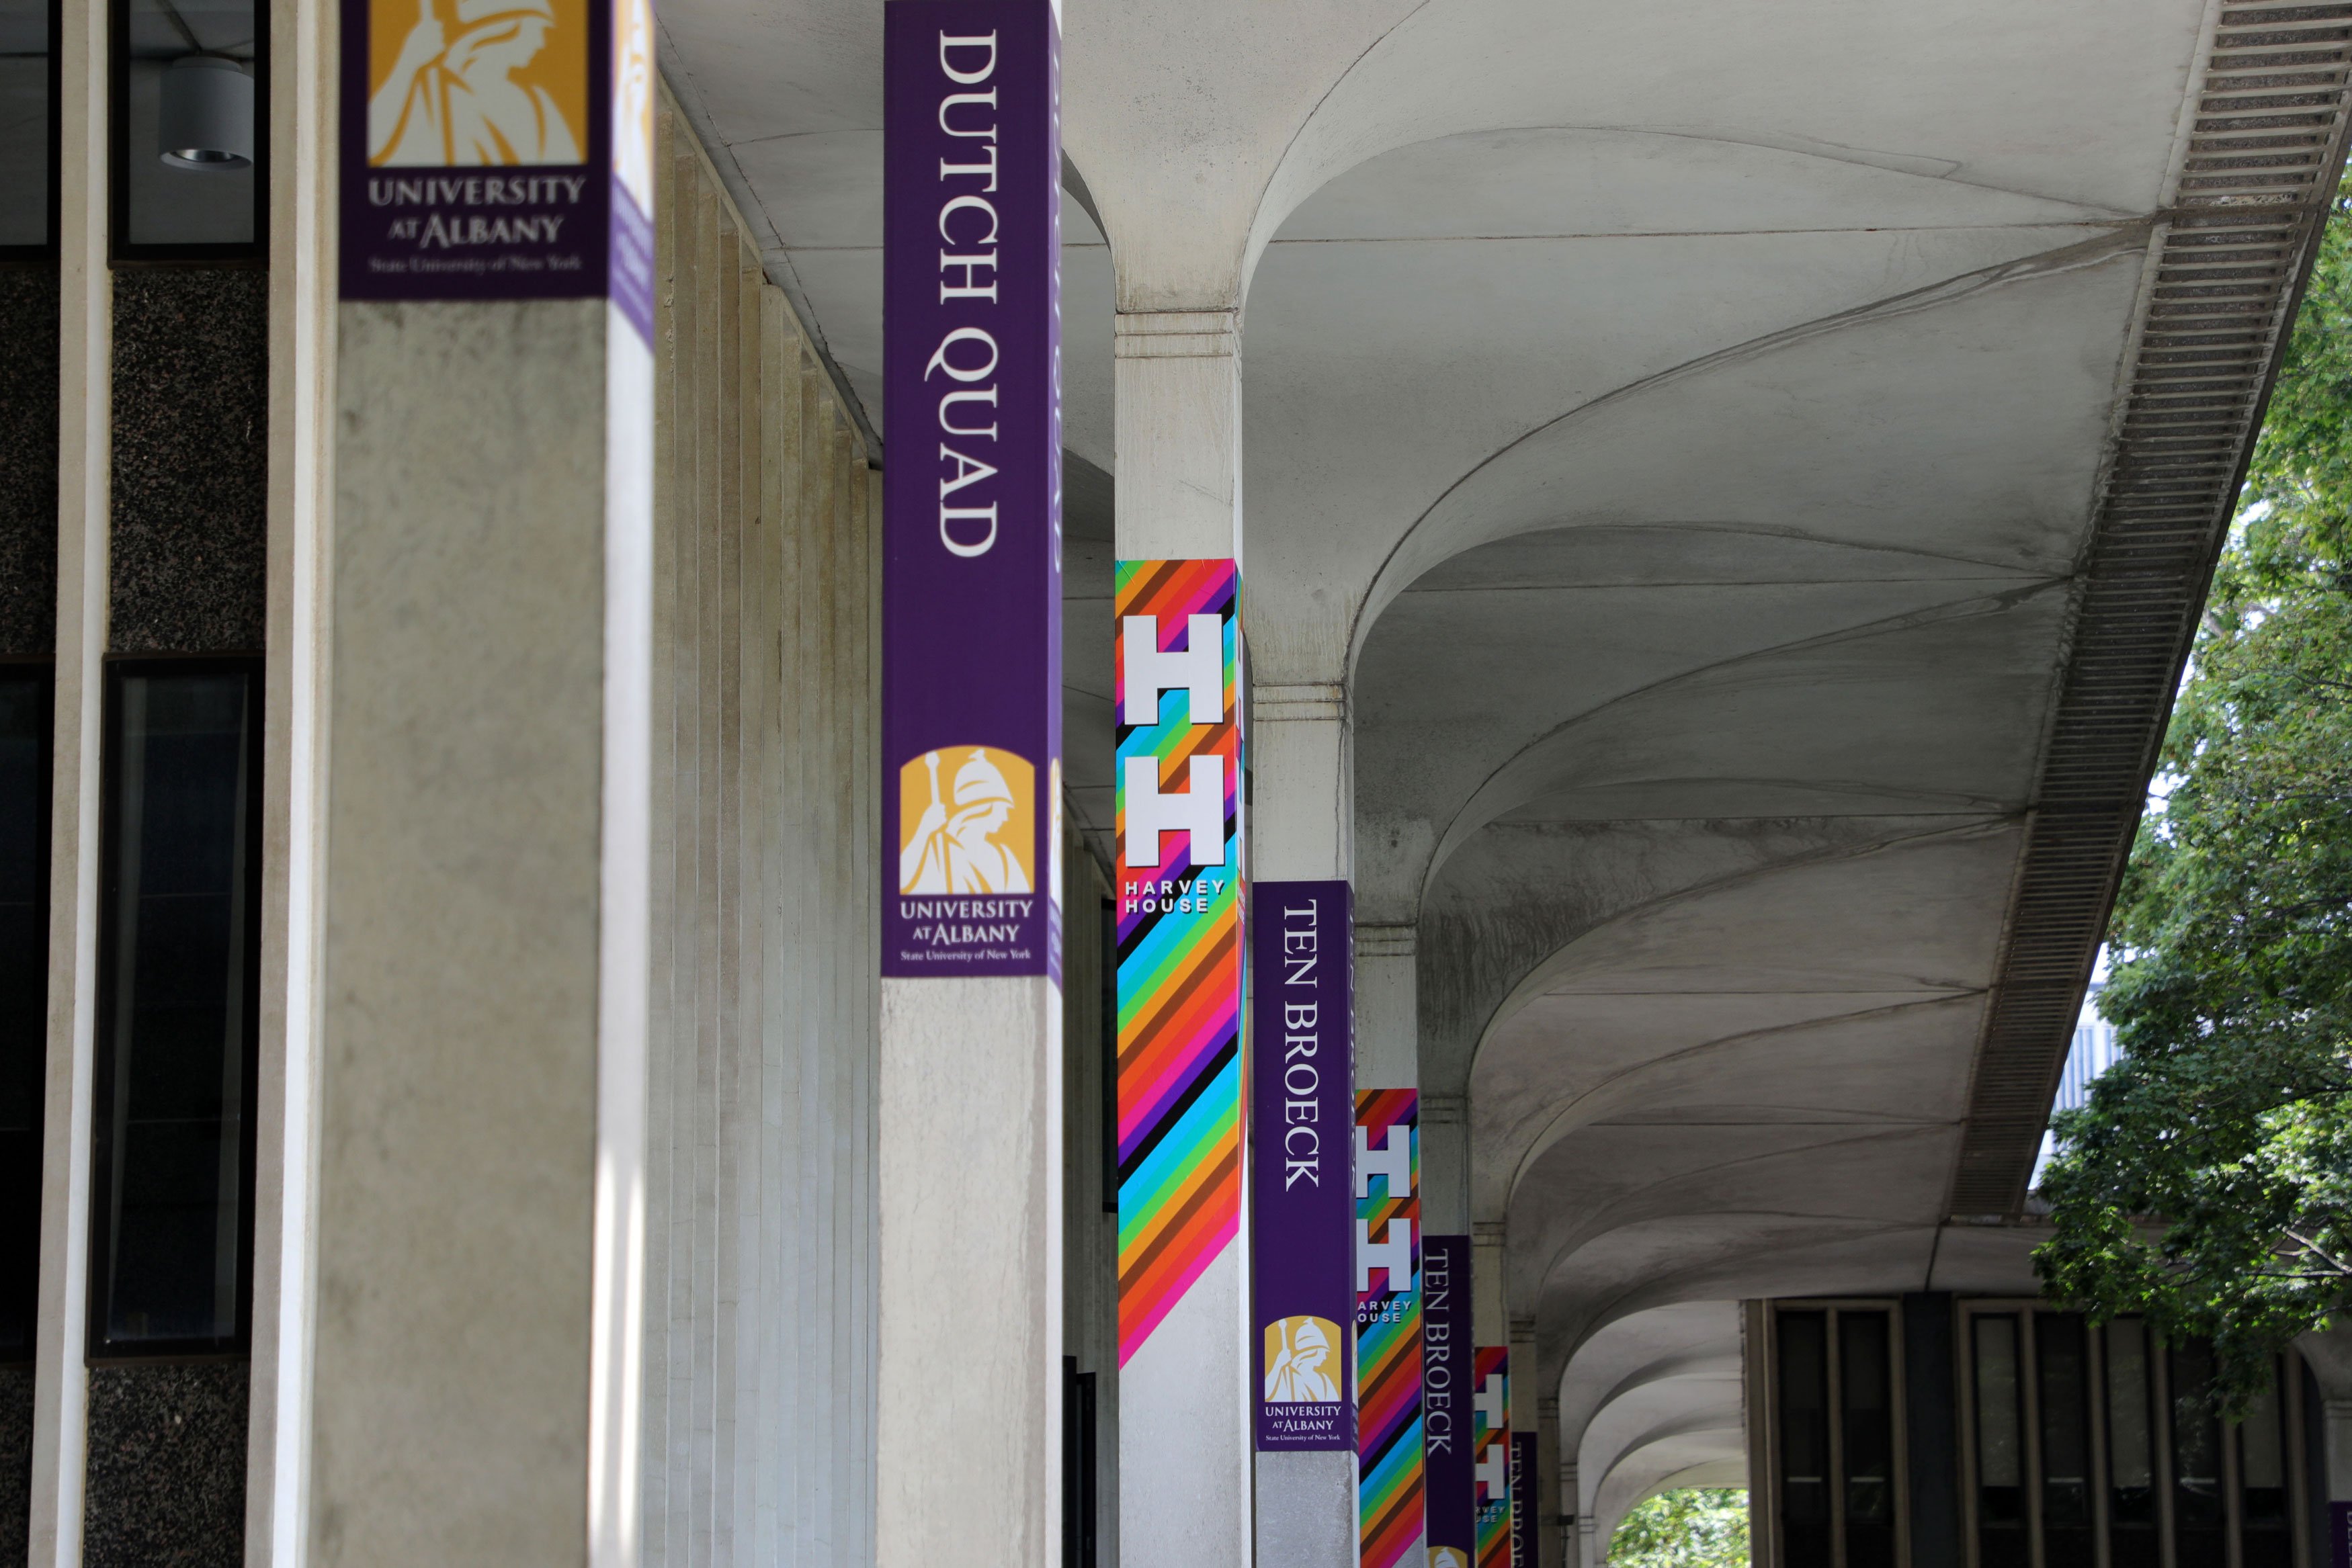 The columns outside Dutch Quad display rainbow colored signs for Harvey House.